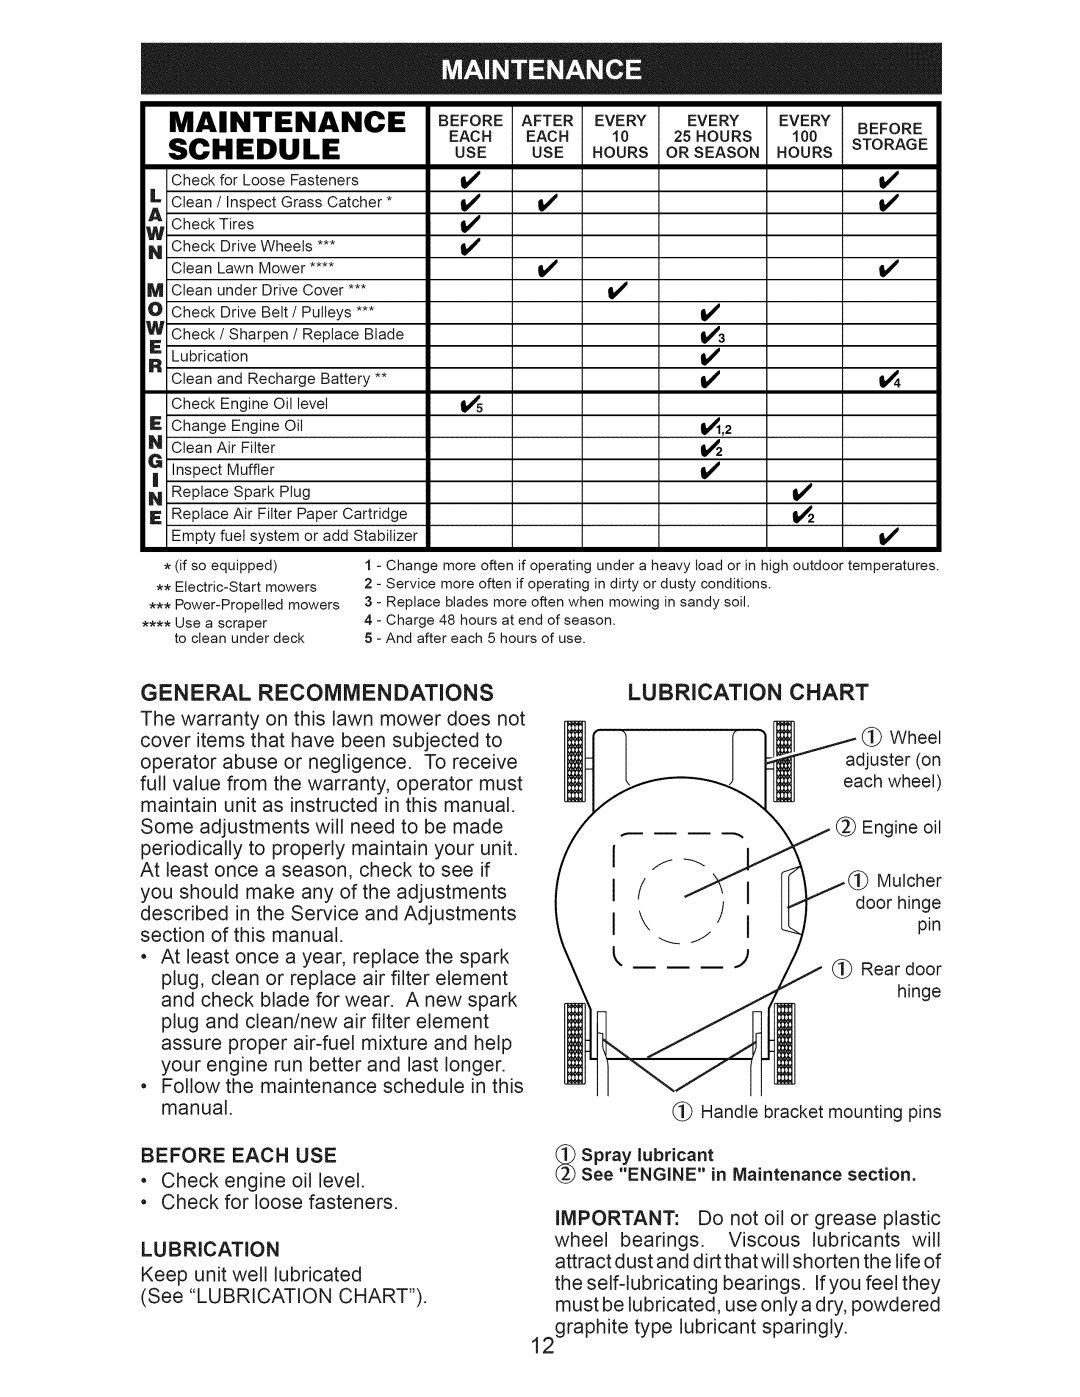 Craftsman 917.376406 owner manual Maintenance, Schedule, Use Hours 